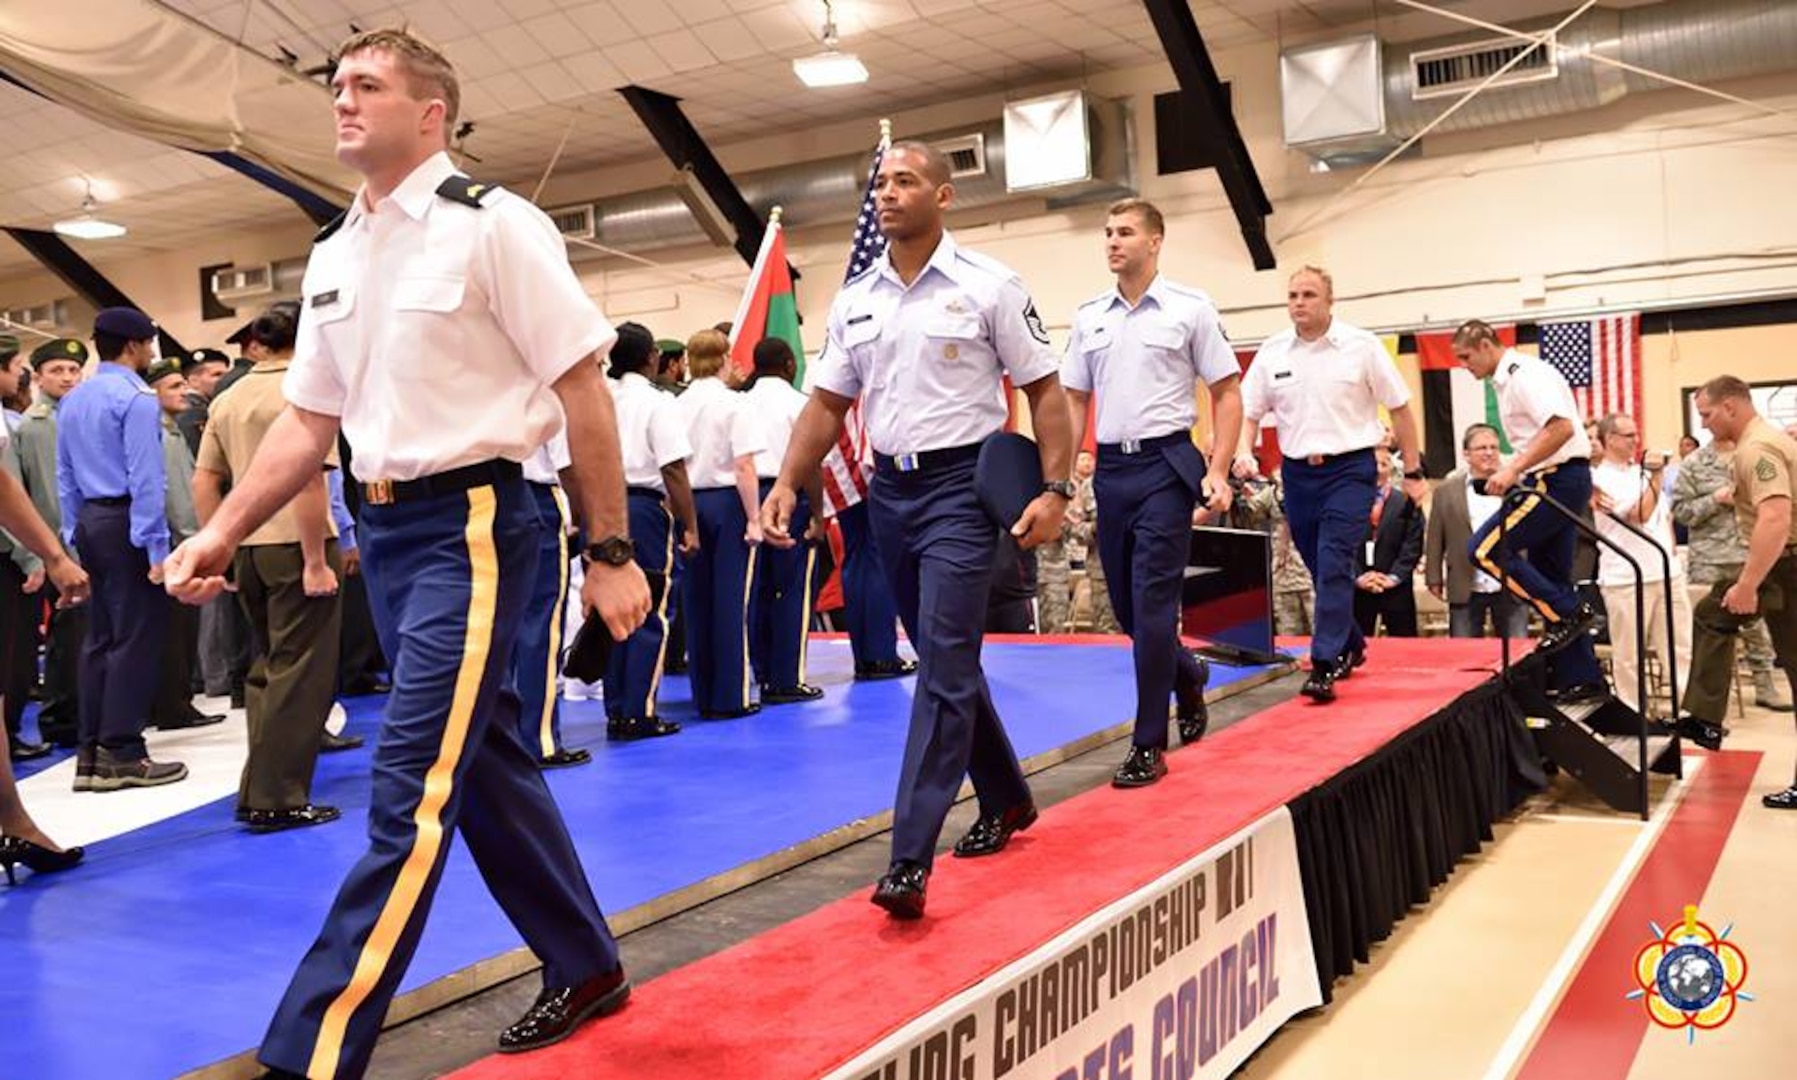 The US Armed Forces Wrestling Team marching during the Opening Ceremony of the 29th CISM World Military Wrestling Championship at Joint Base McGuire-Dix-Lakehurst (MDL), New Jersey 1-8 October